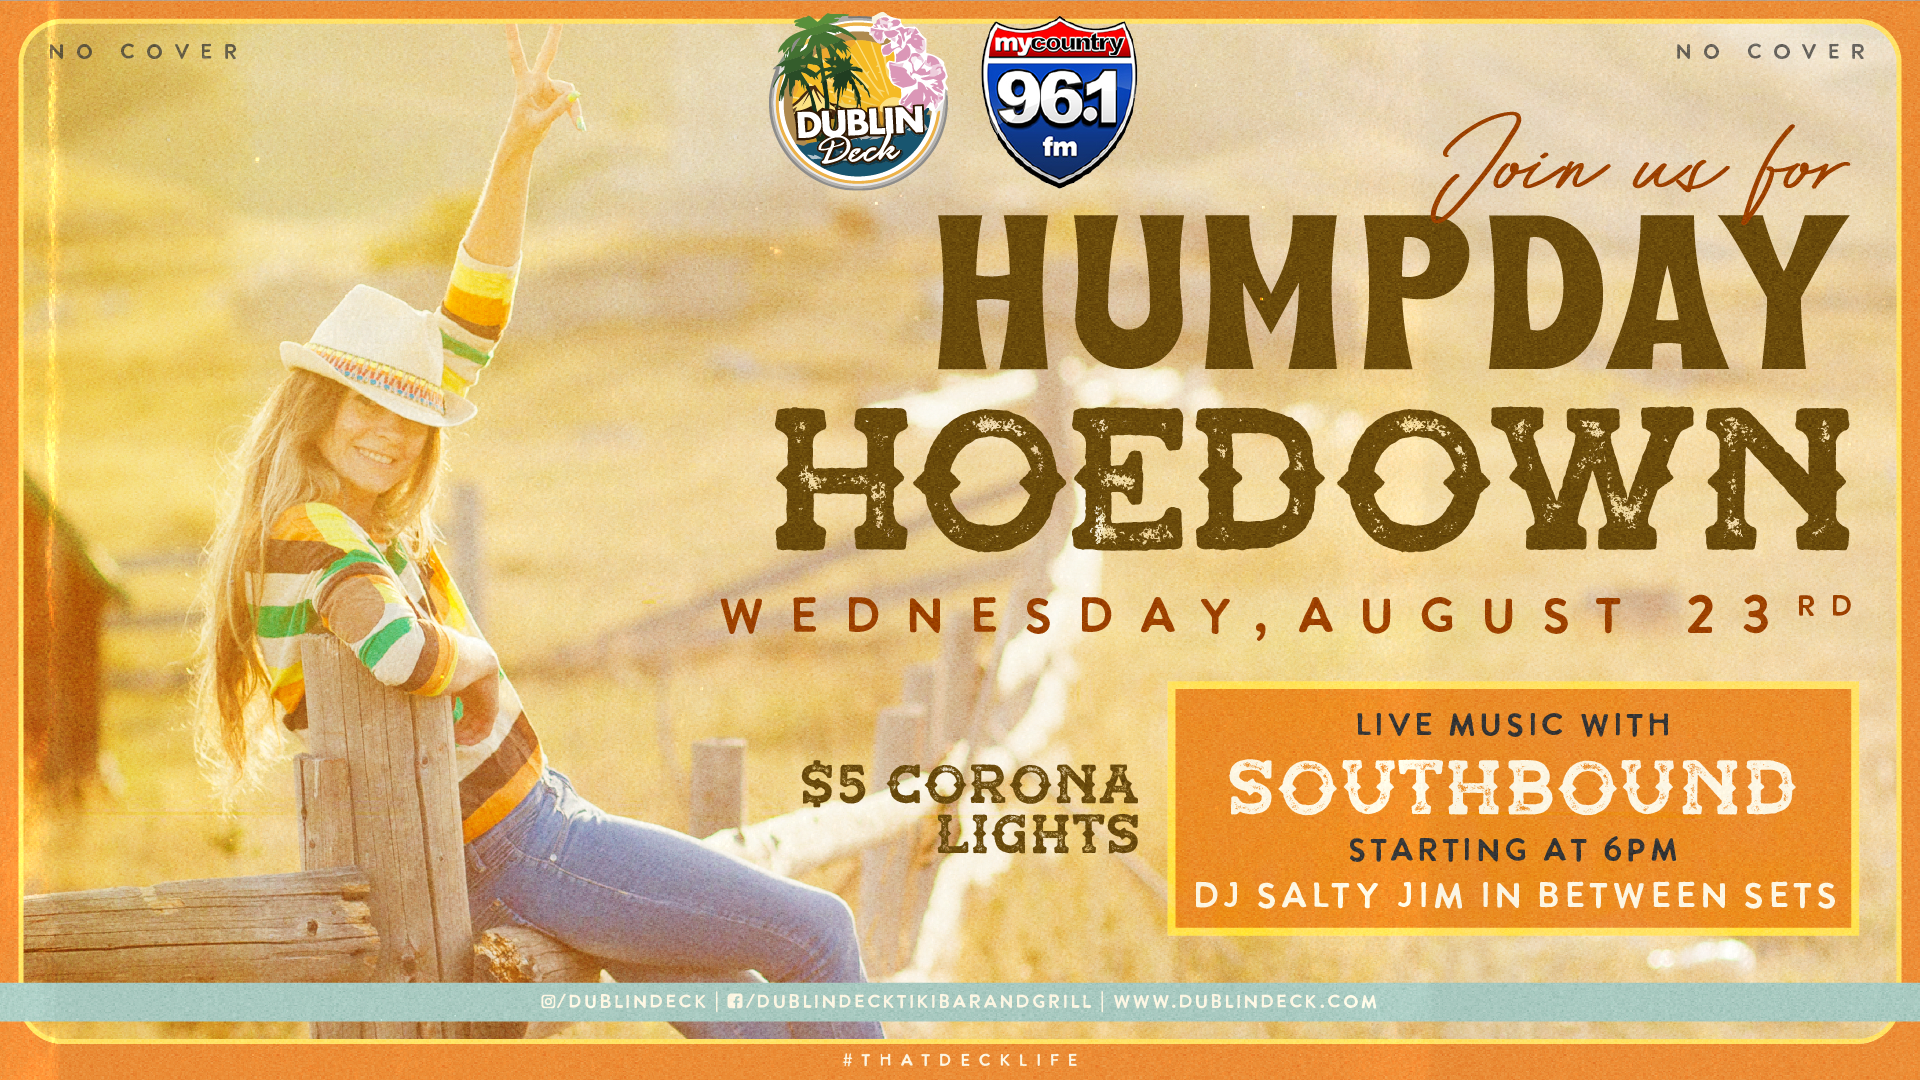 Get your cowboy boots on for another Humpday Hoedown with Southbound! Music begins at 6PM